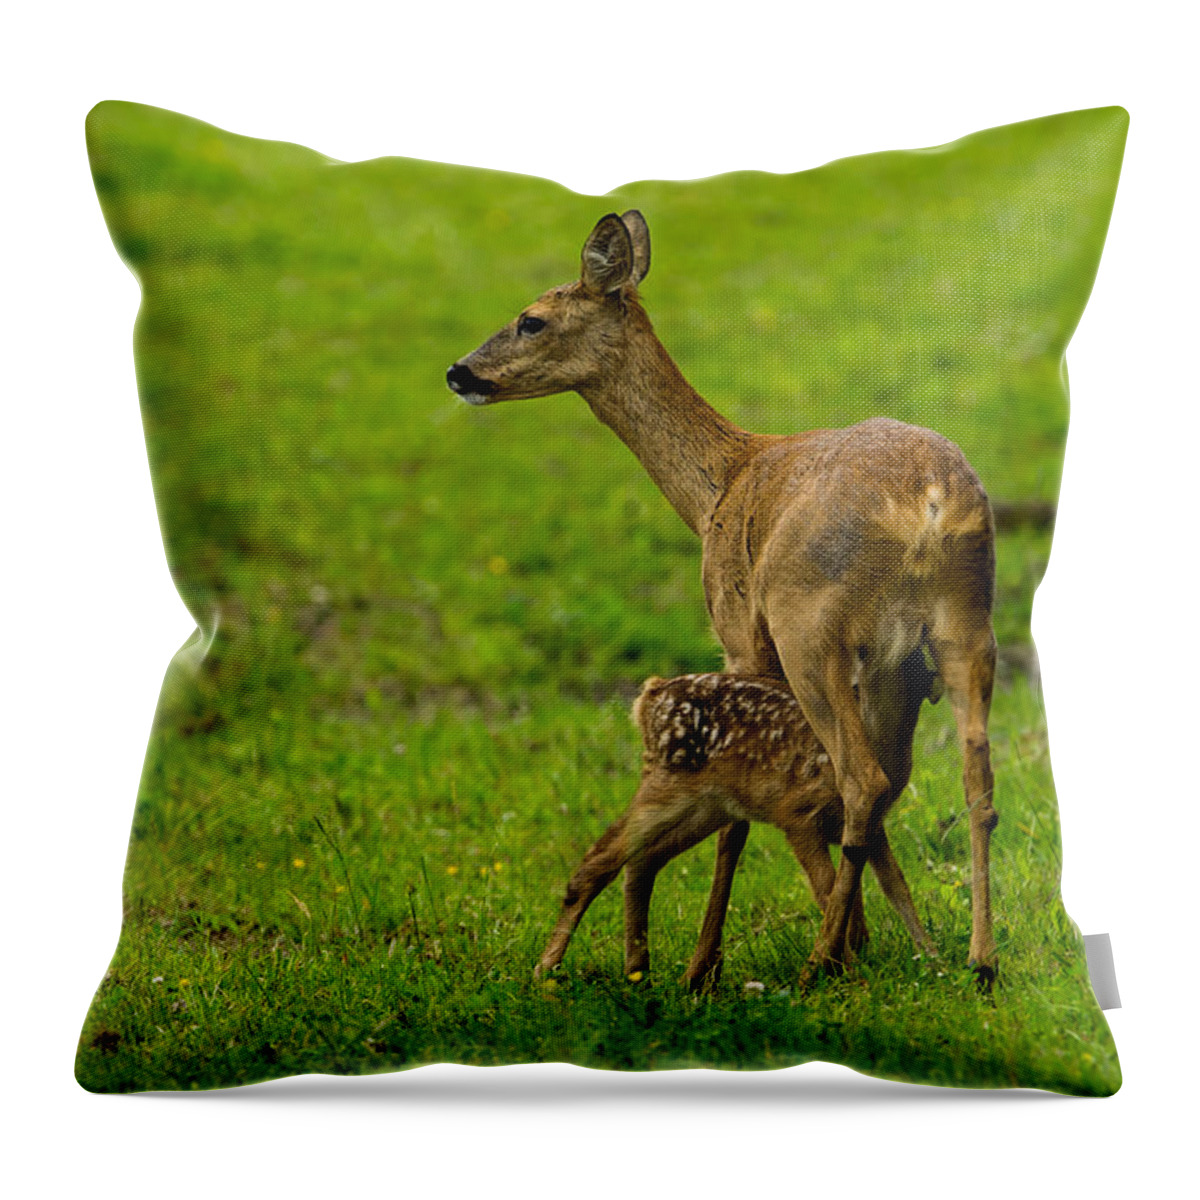 Hungry Roe Deer Fawn Throw Pillow featuring the photograph Hungry by Torbjorn Swenelius